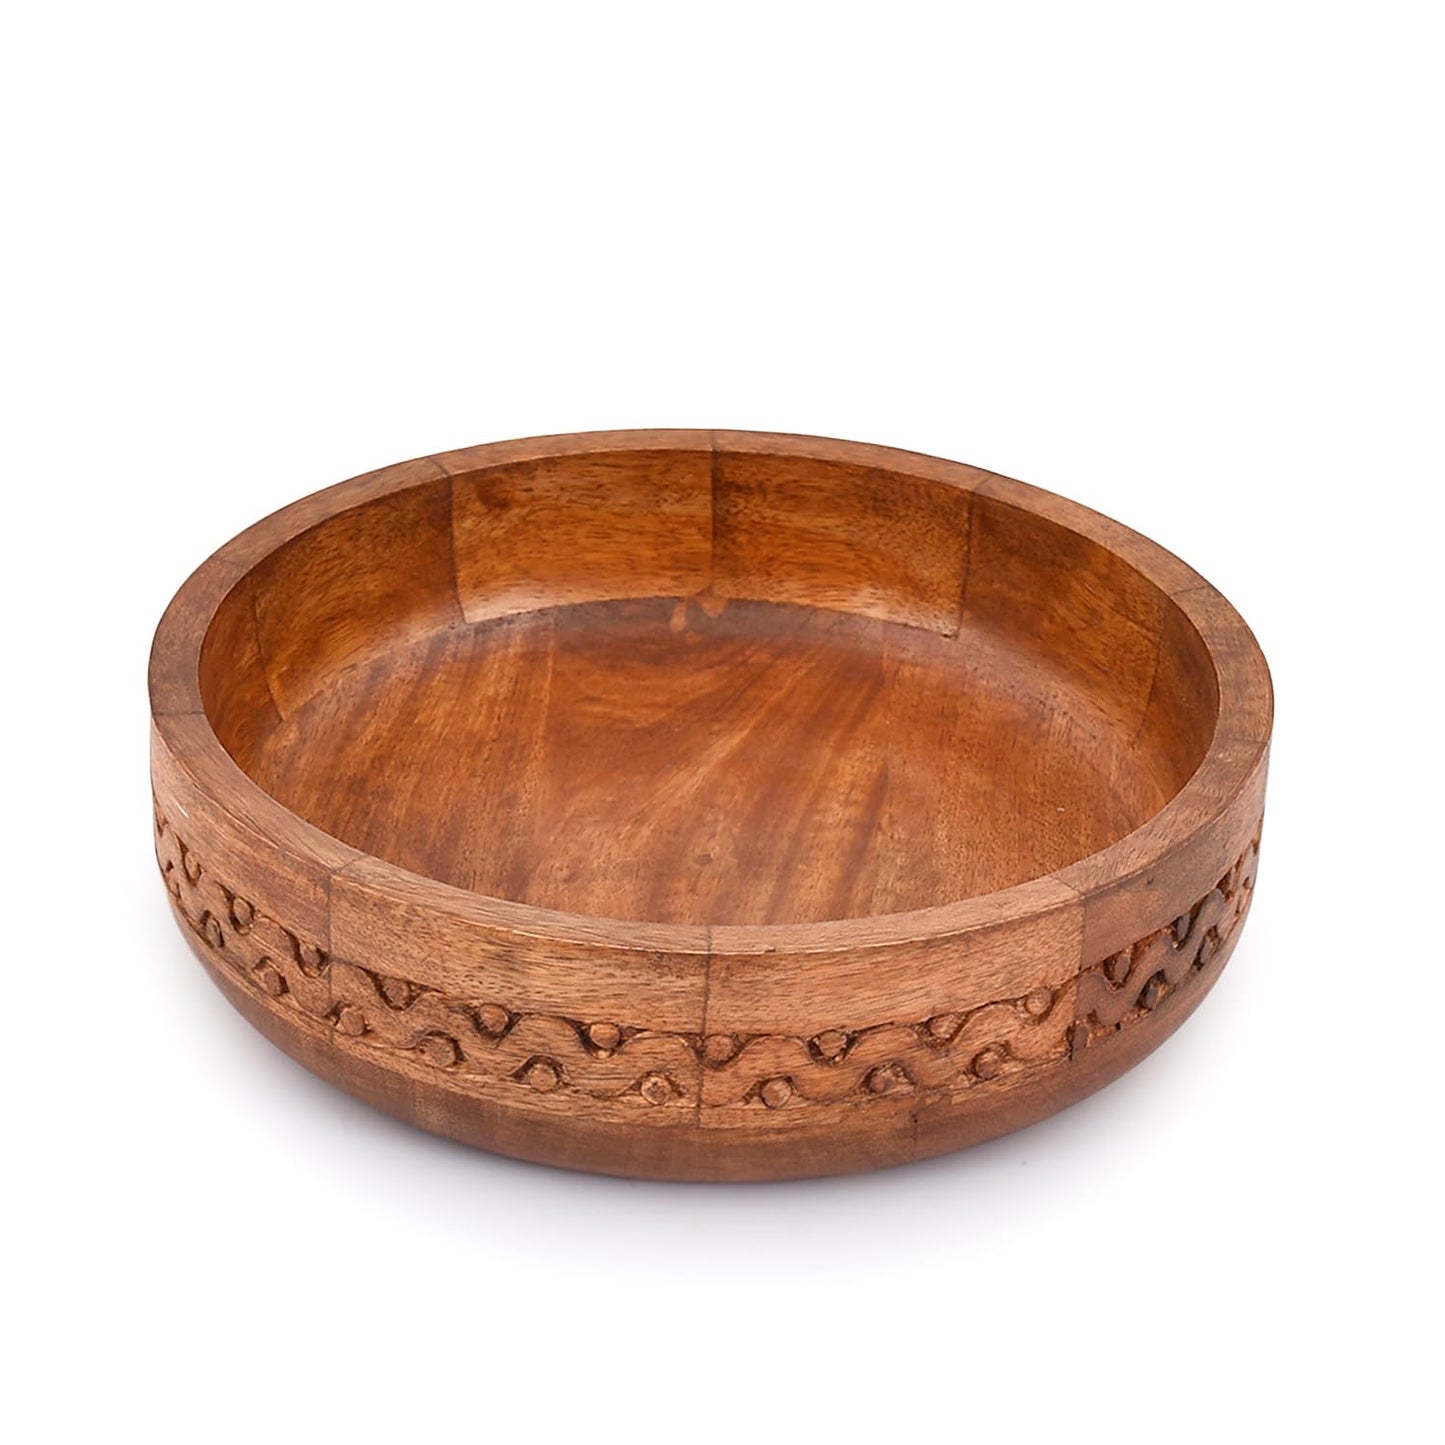 EDHAS Mango Wood Decorative Round Carved Bowl for Decoration, Centerpiece Bowl for Table (10" x 10" x 2.5")